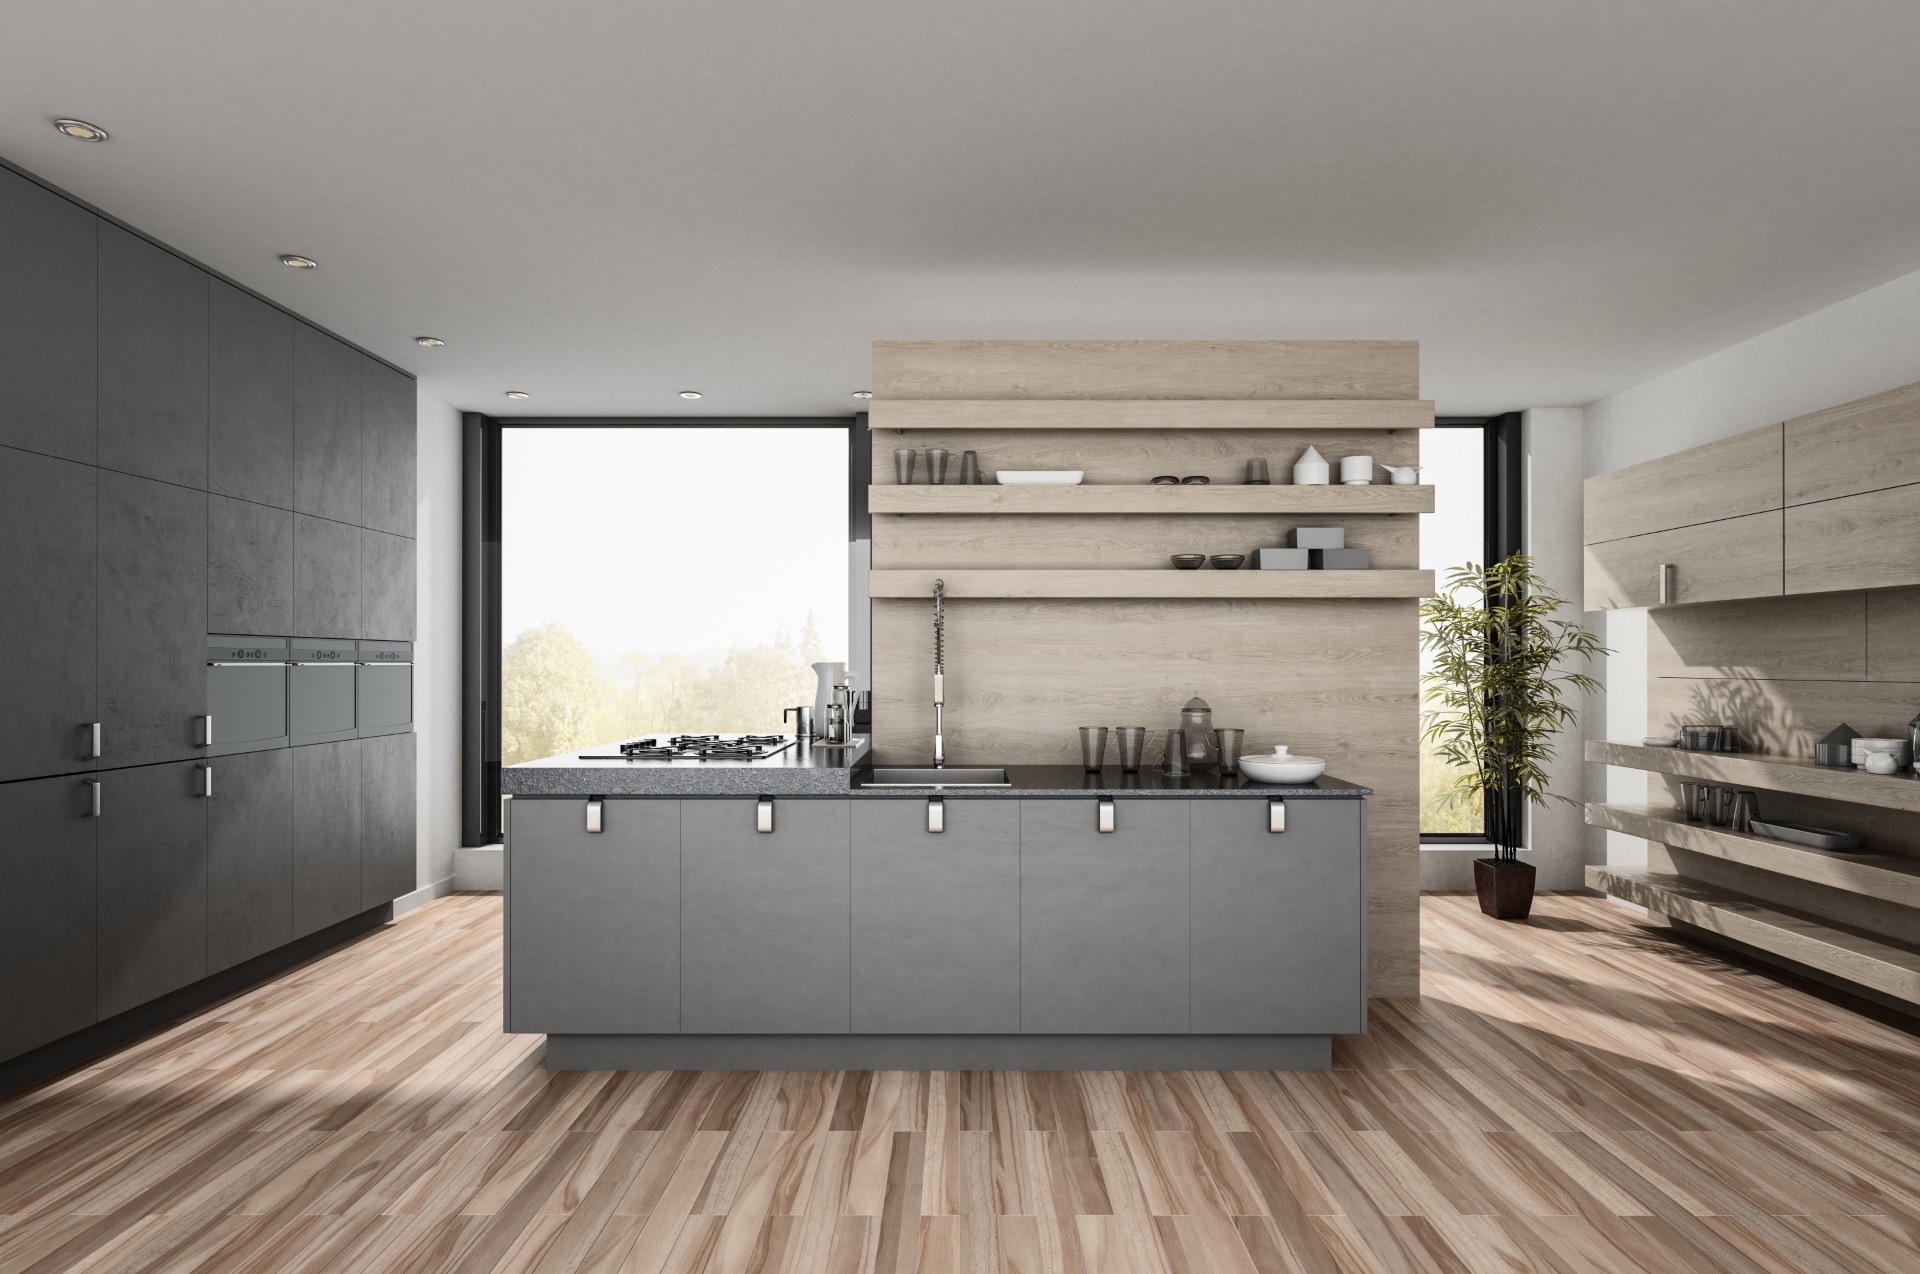 This bizarre kitchen is sure to catch your attention from its minimalist modern roots and decor. It has all the functionalities you need including hidden storage, space saving stovetop, and storage for your dishes.